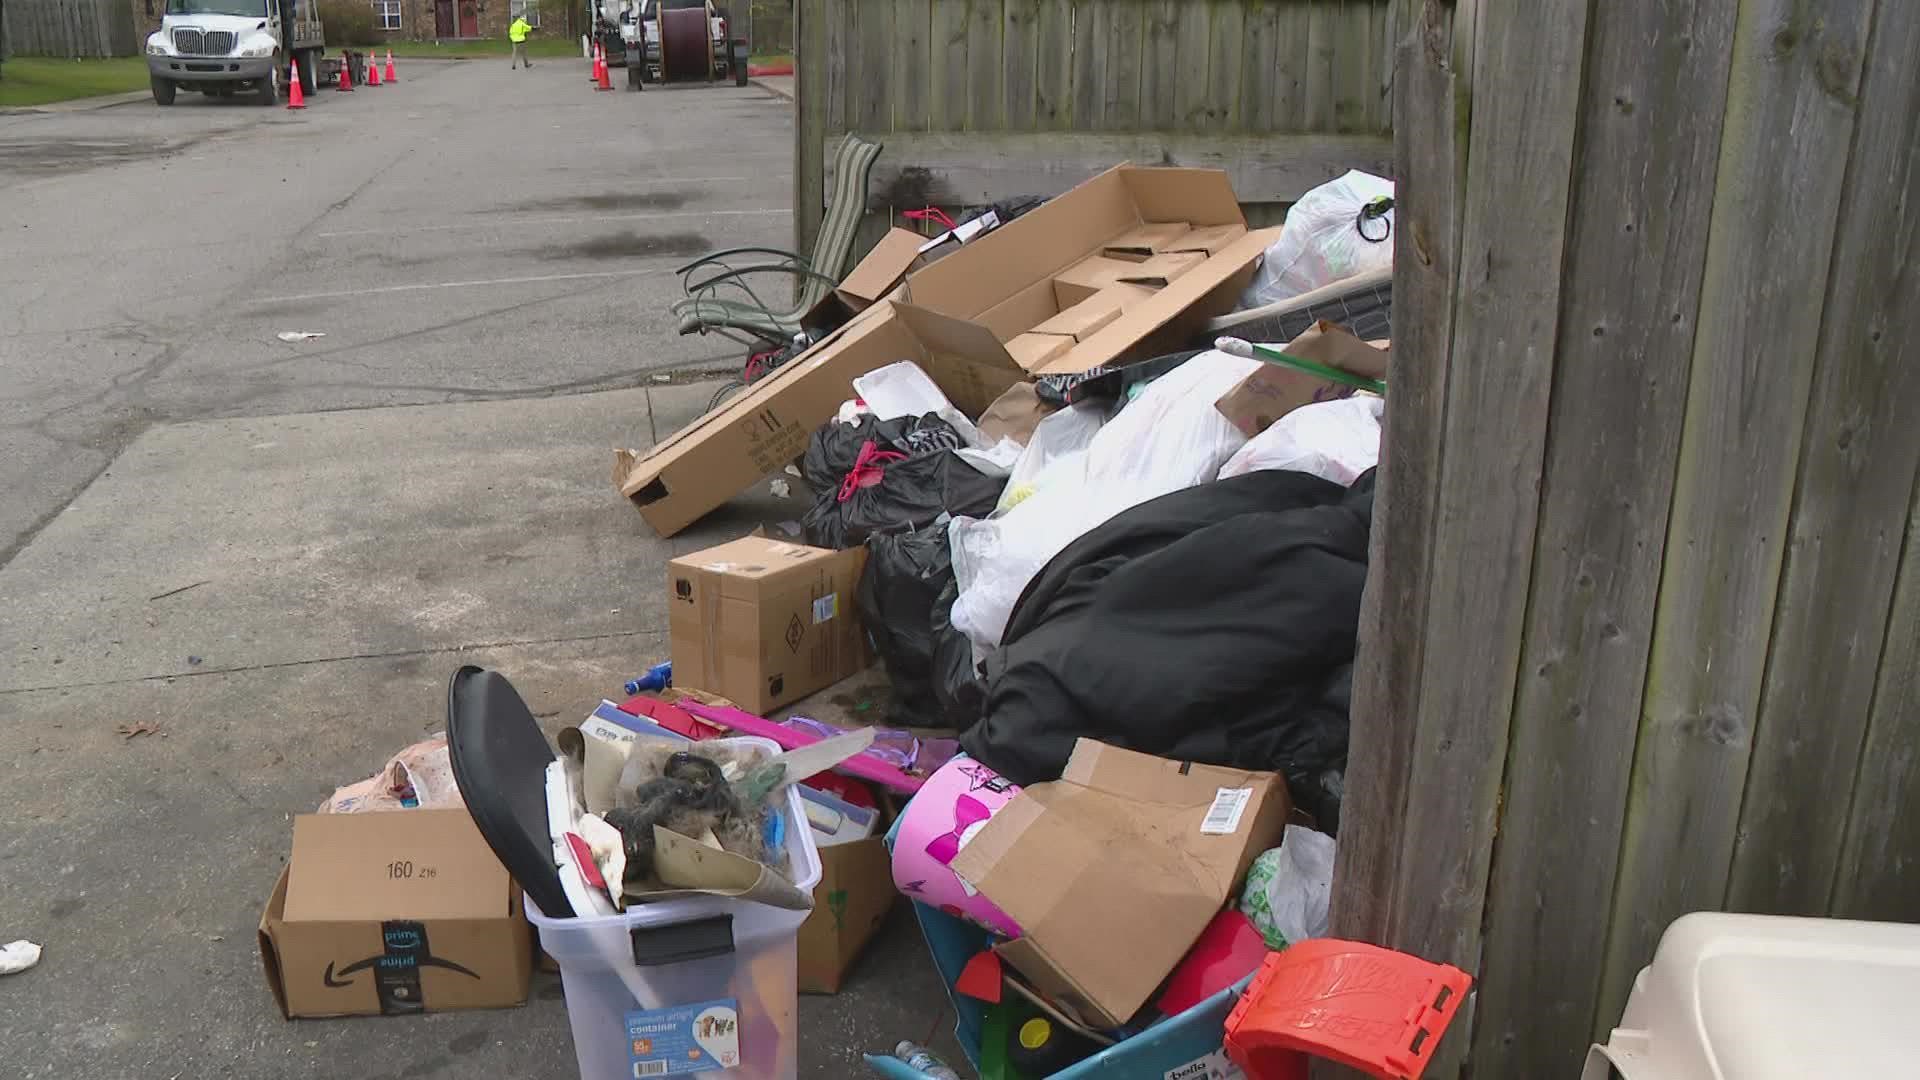 People living at the CheswickeVillage apartments say dumpster disappeared weeks ago, and is now piling up.